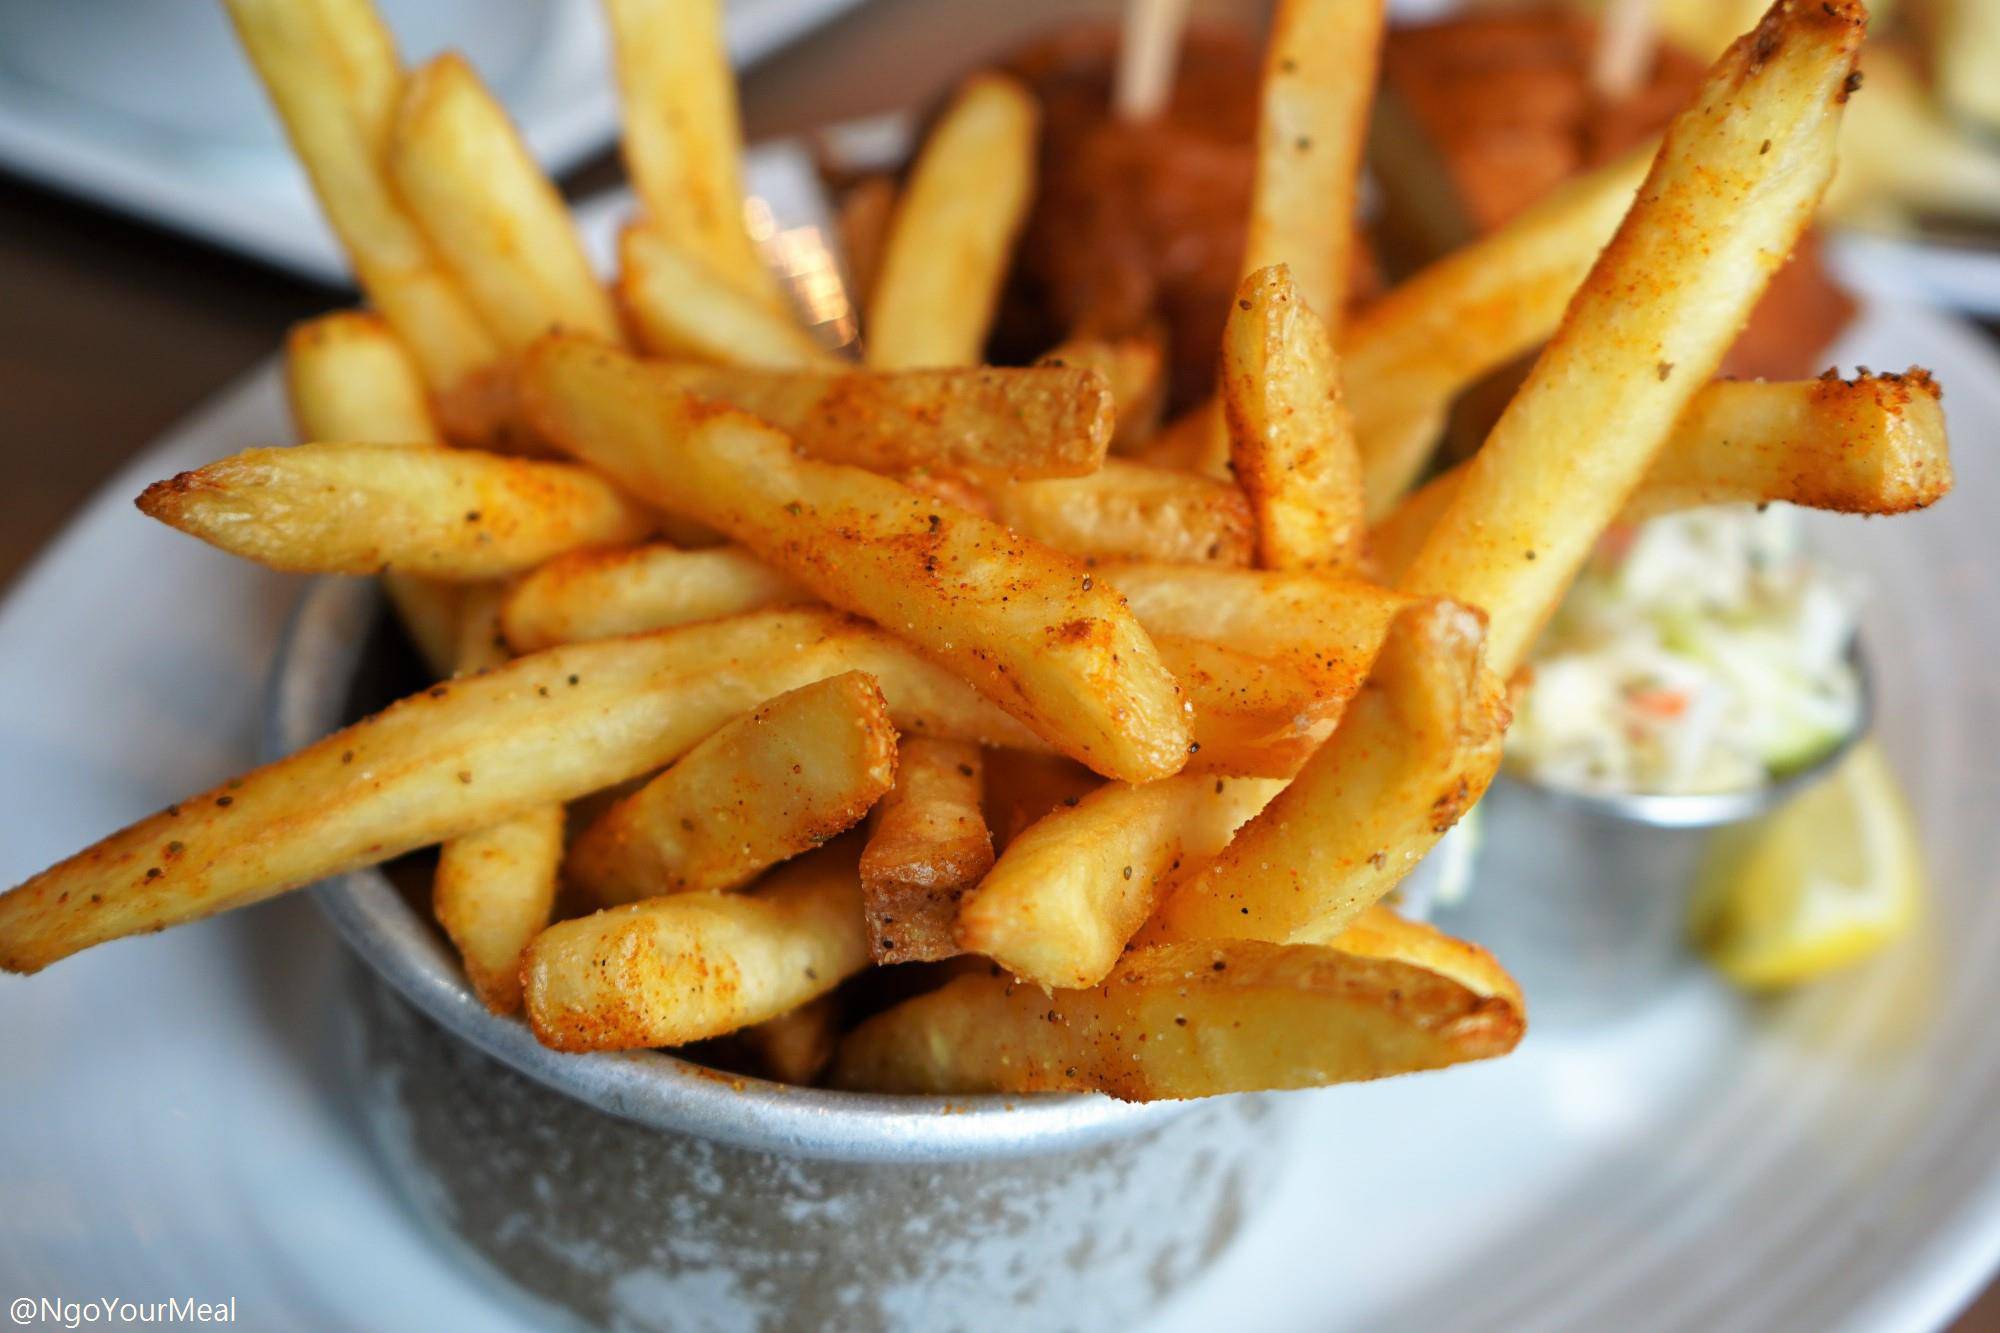 Old Bay Fries at Island Creek Oyster Bar in Boston